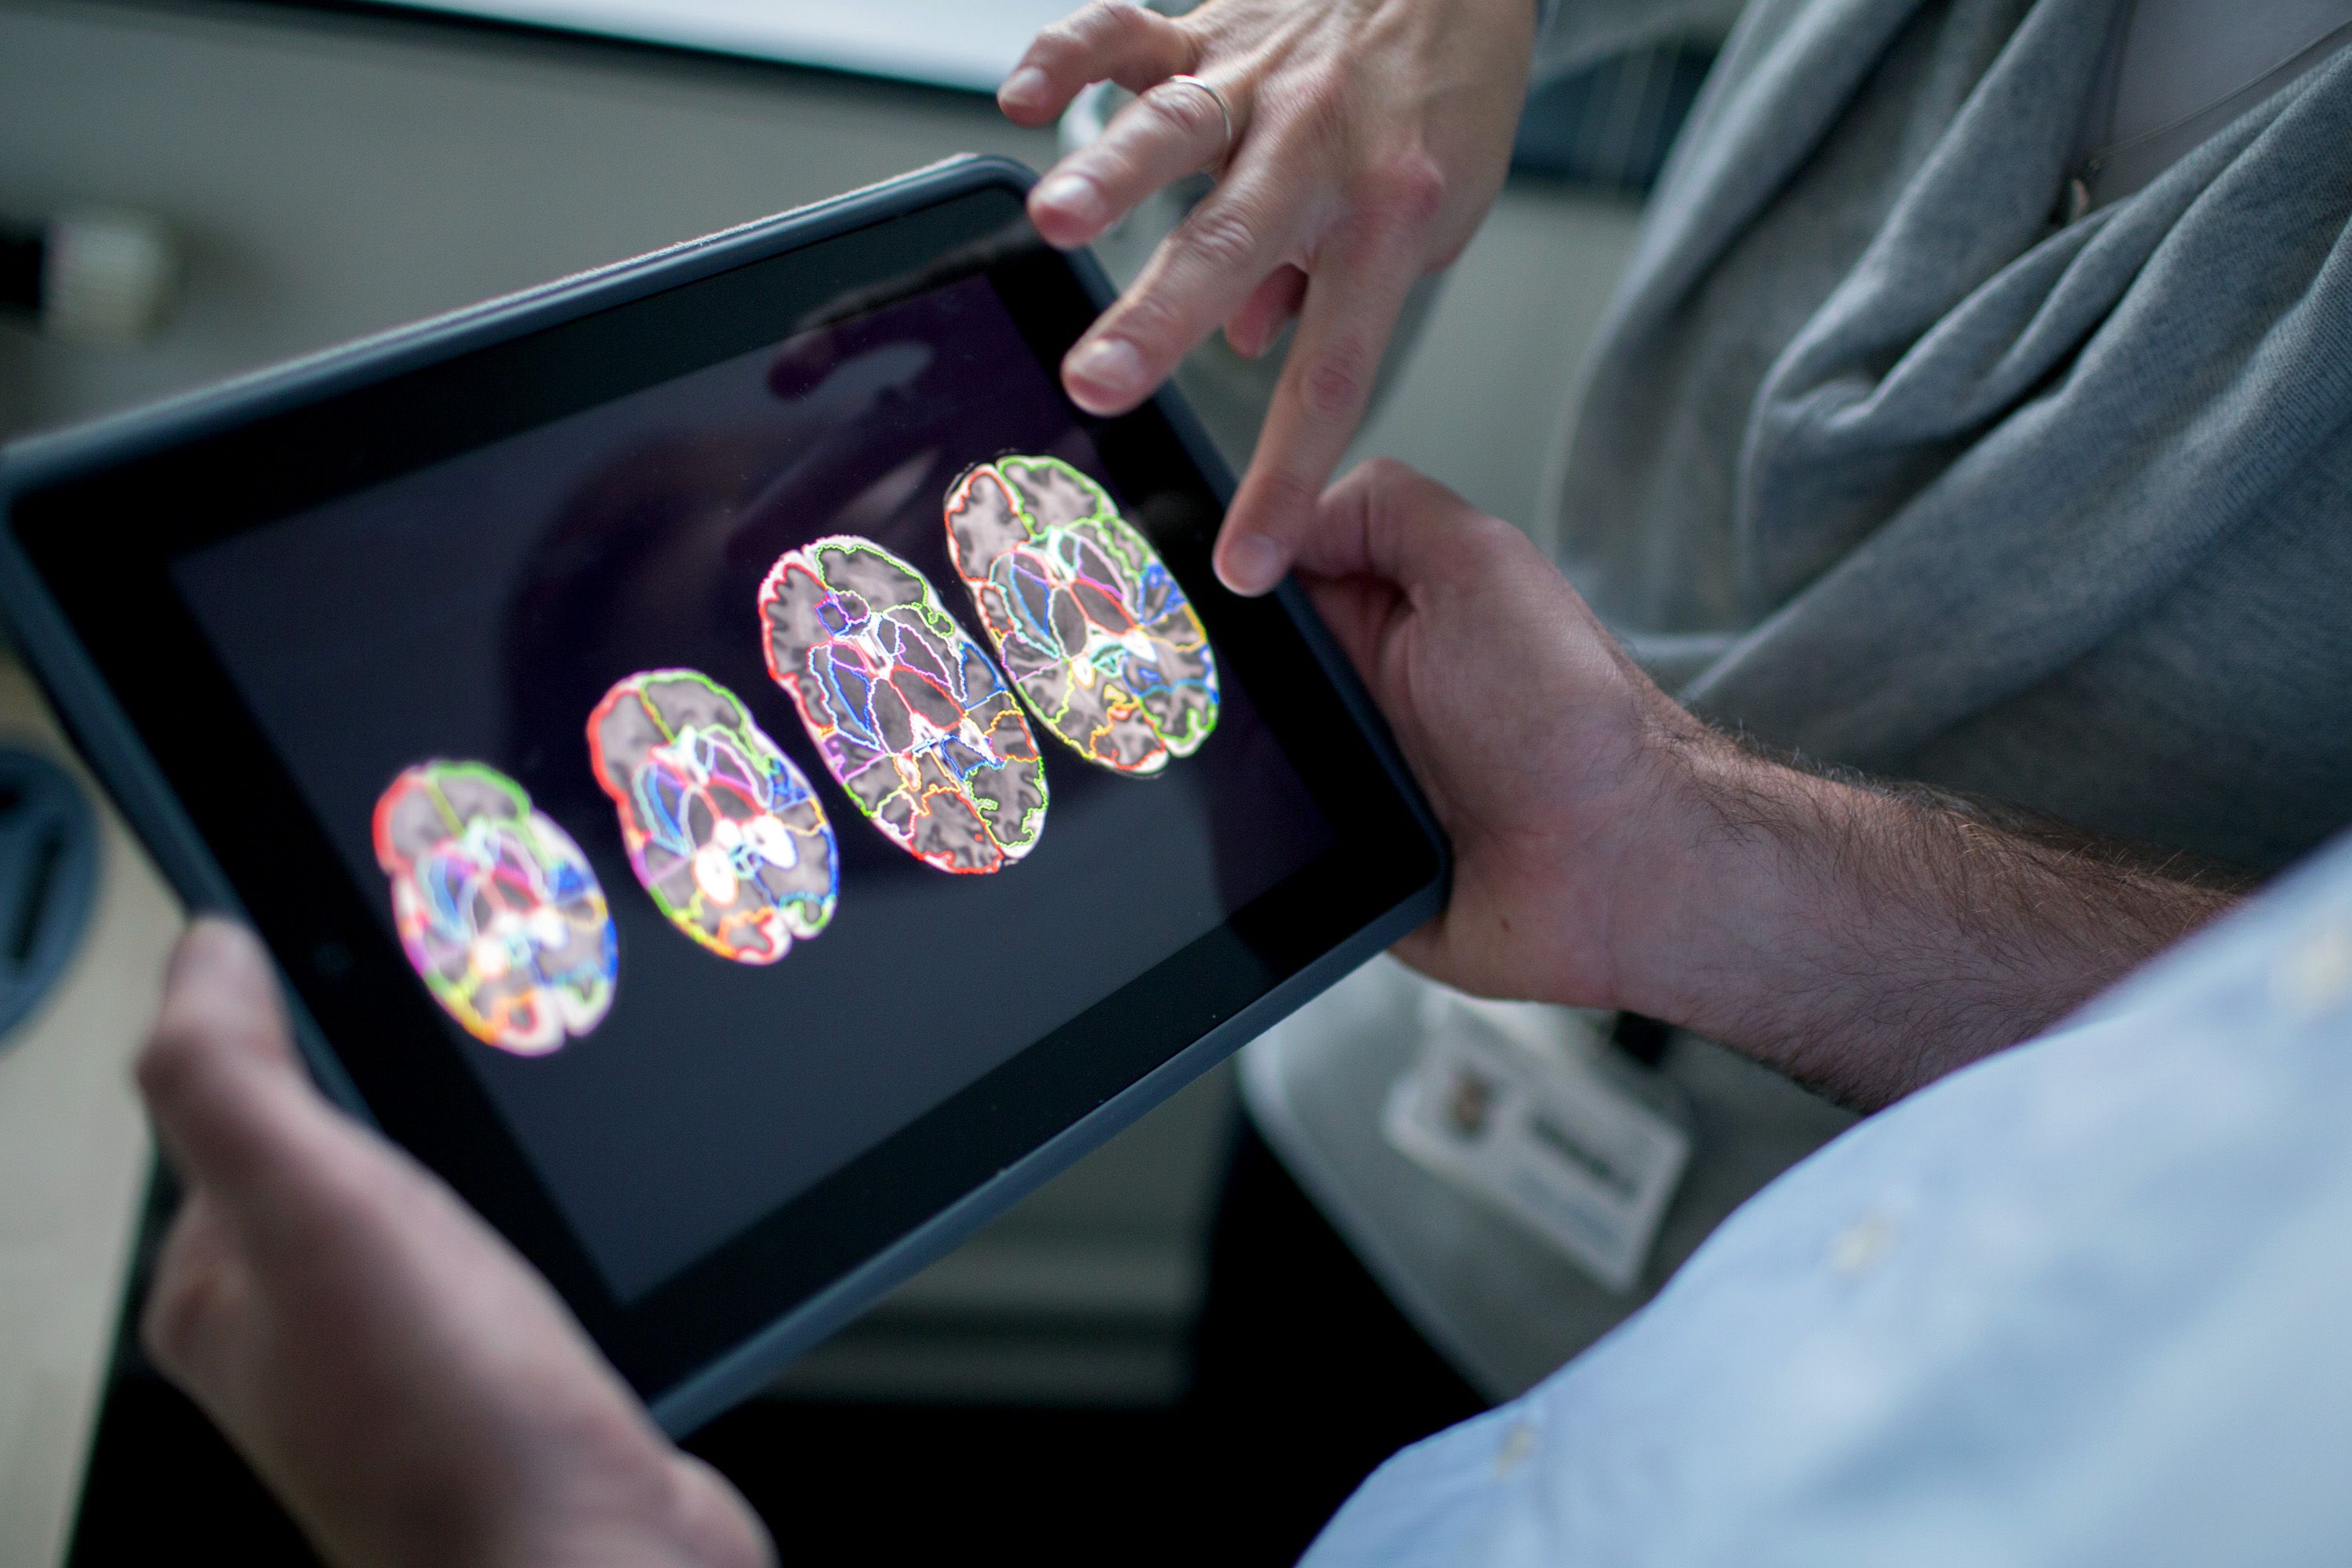 The hands of two people examining colourful brain scans on a tablet